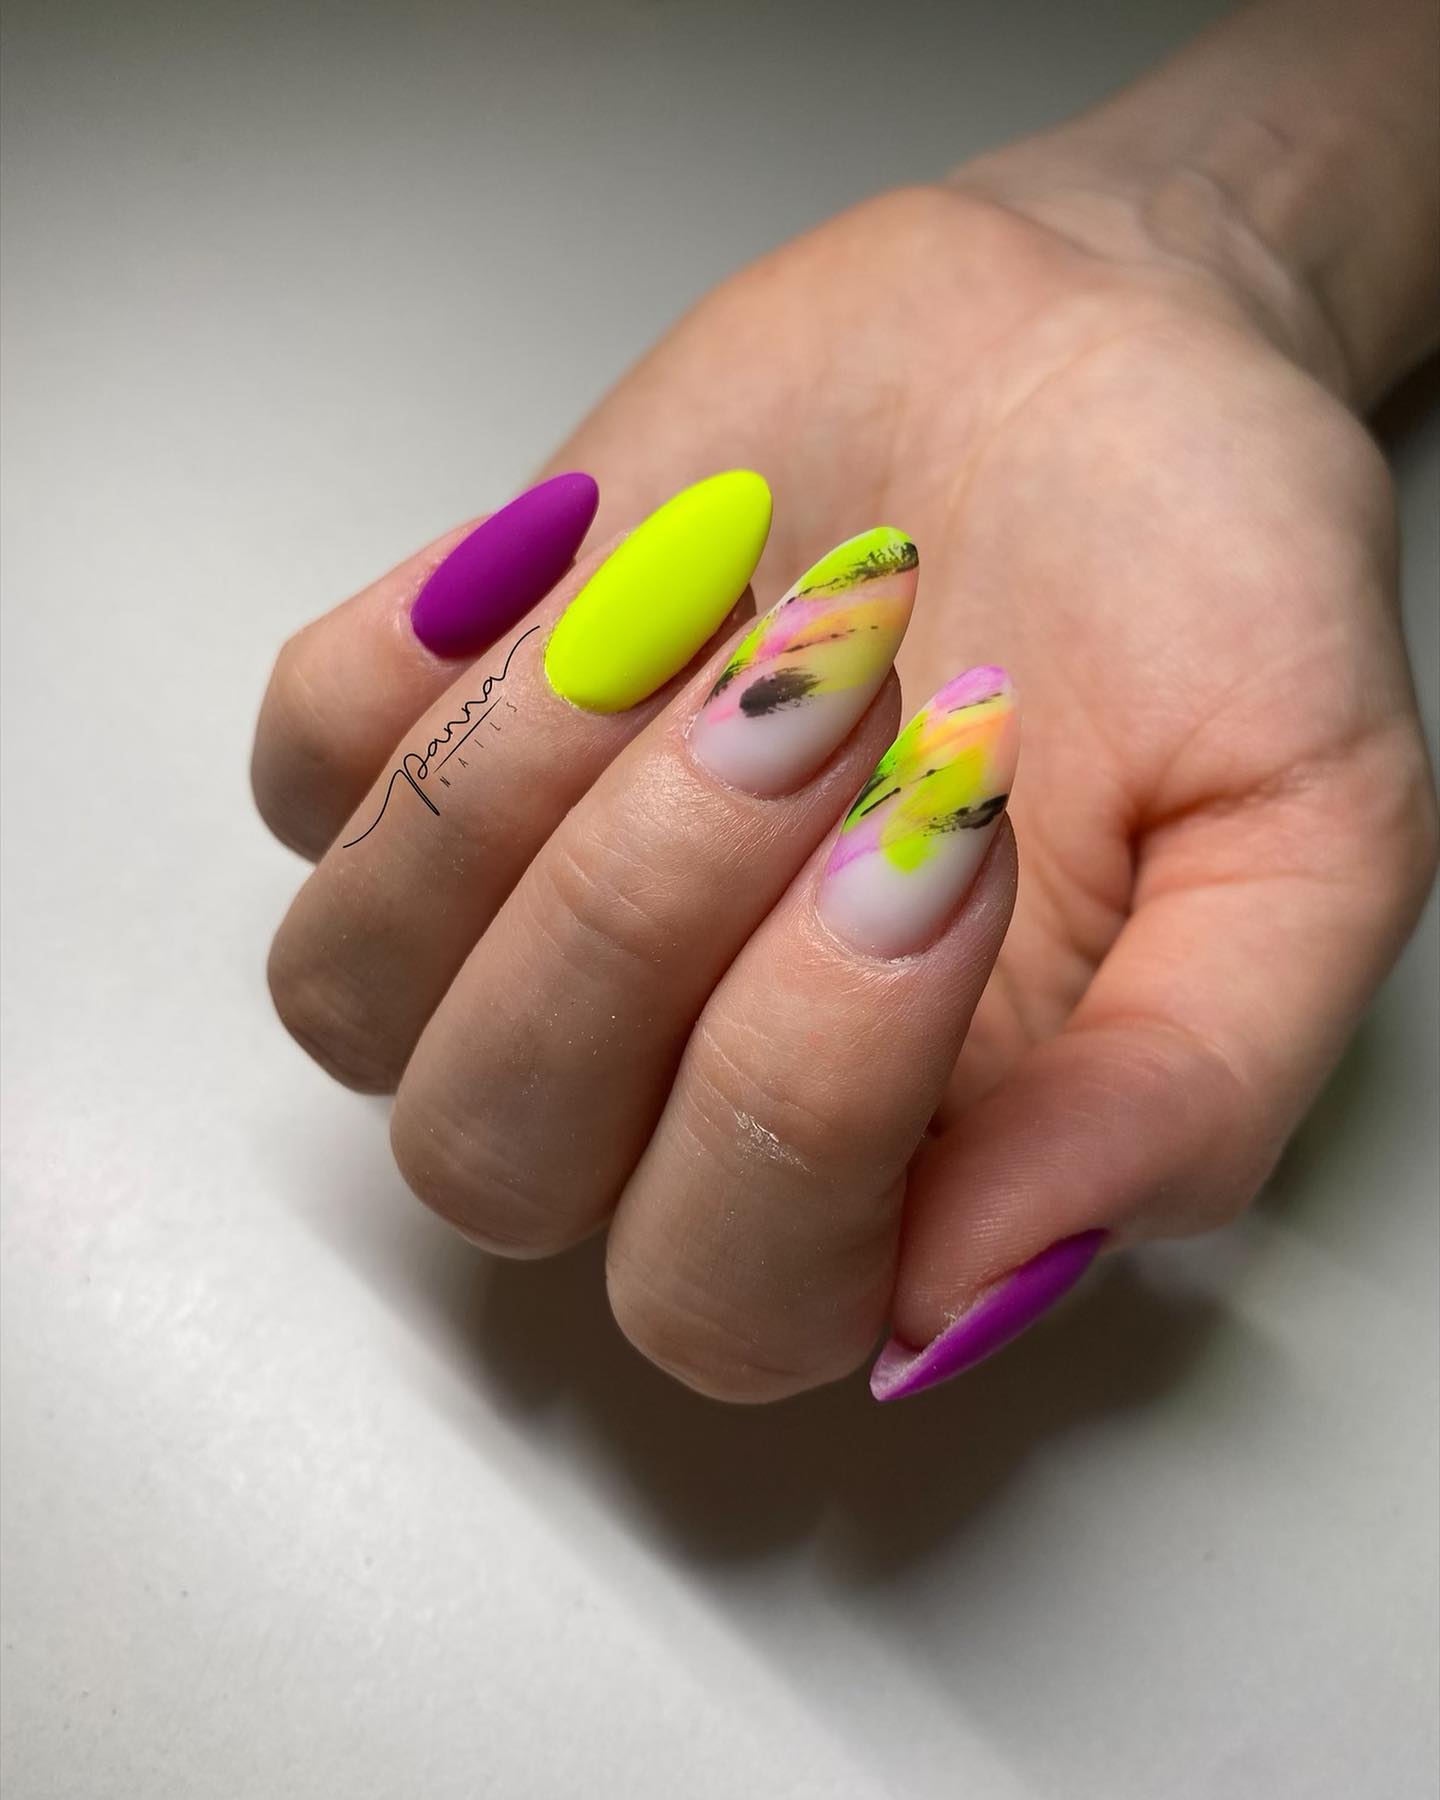 Glossy nail polishes are always nice but what about understated matte nail designs? Try this out if you like purple and yellow neon colors.